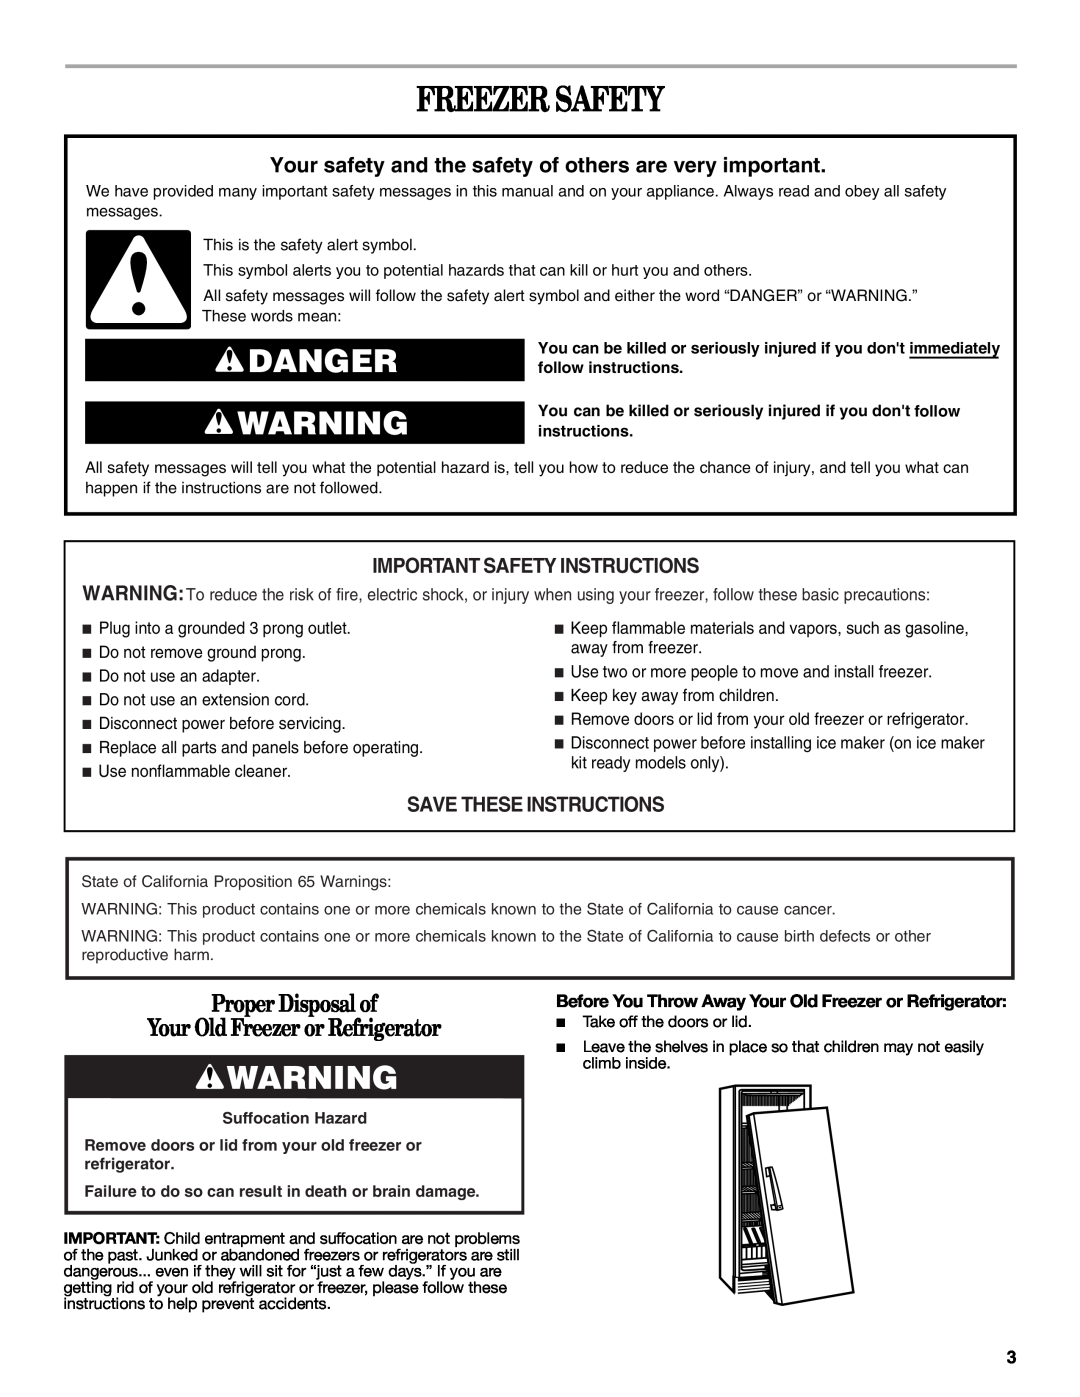 Whirlpool EV161NZTQ Freezer Safety, Danger, Proper Disposal of, Your Old Freezer or Refrigerator, Save These Instructions 